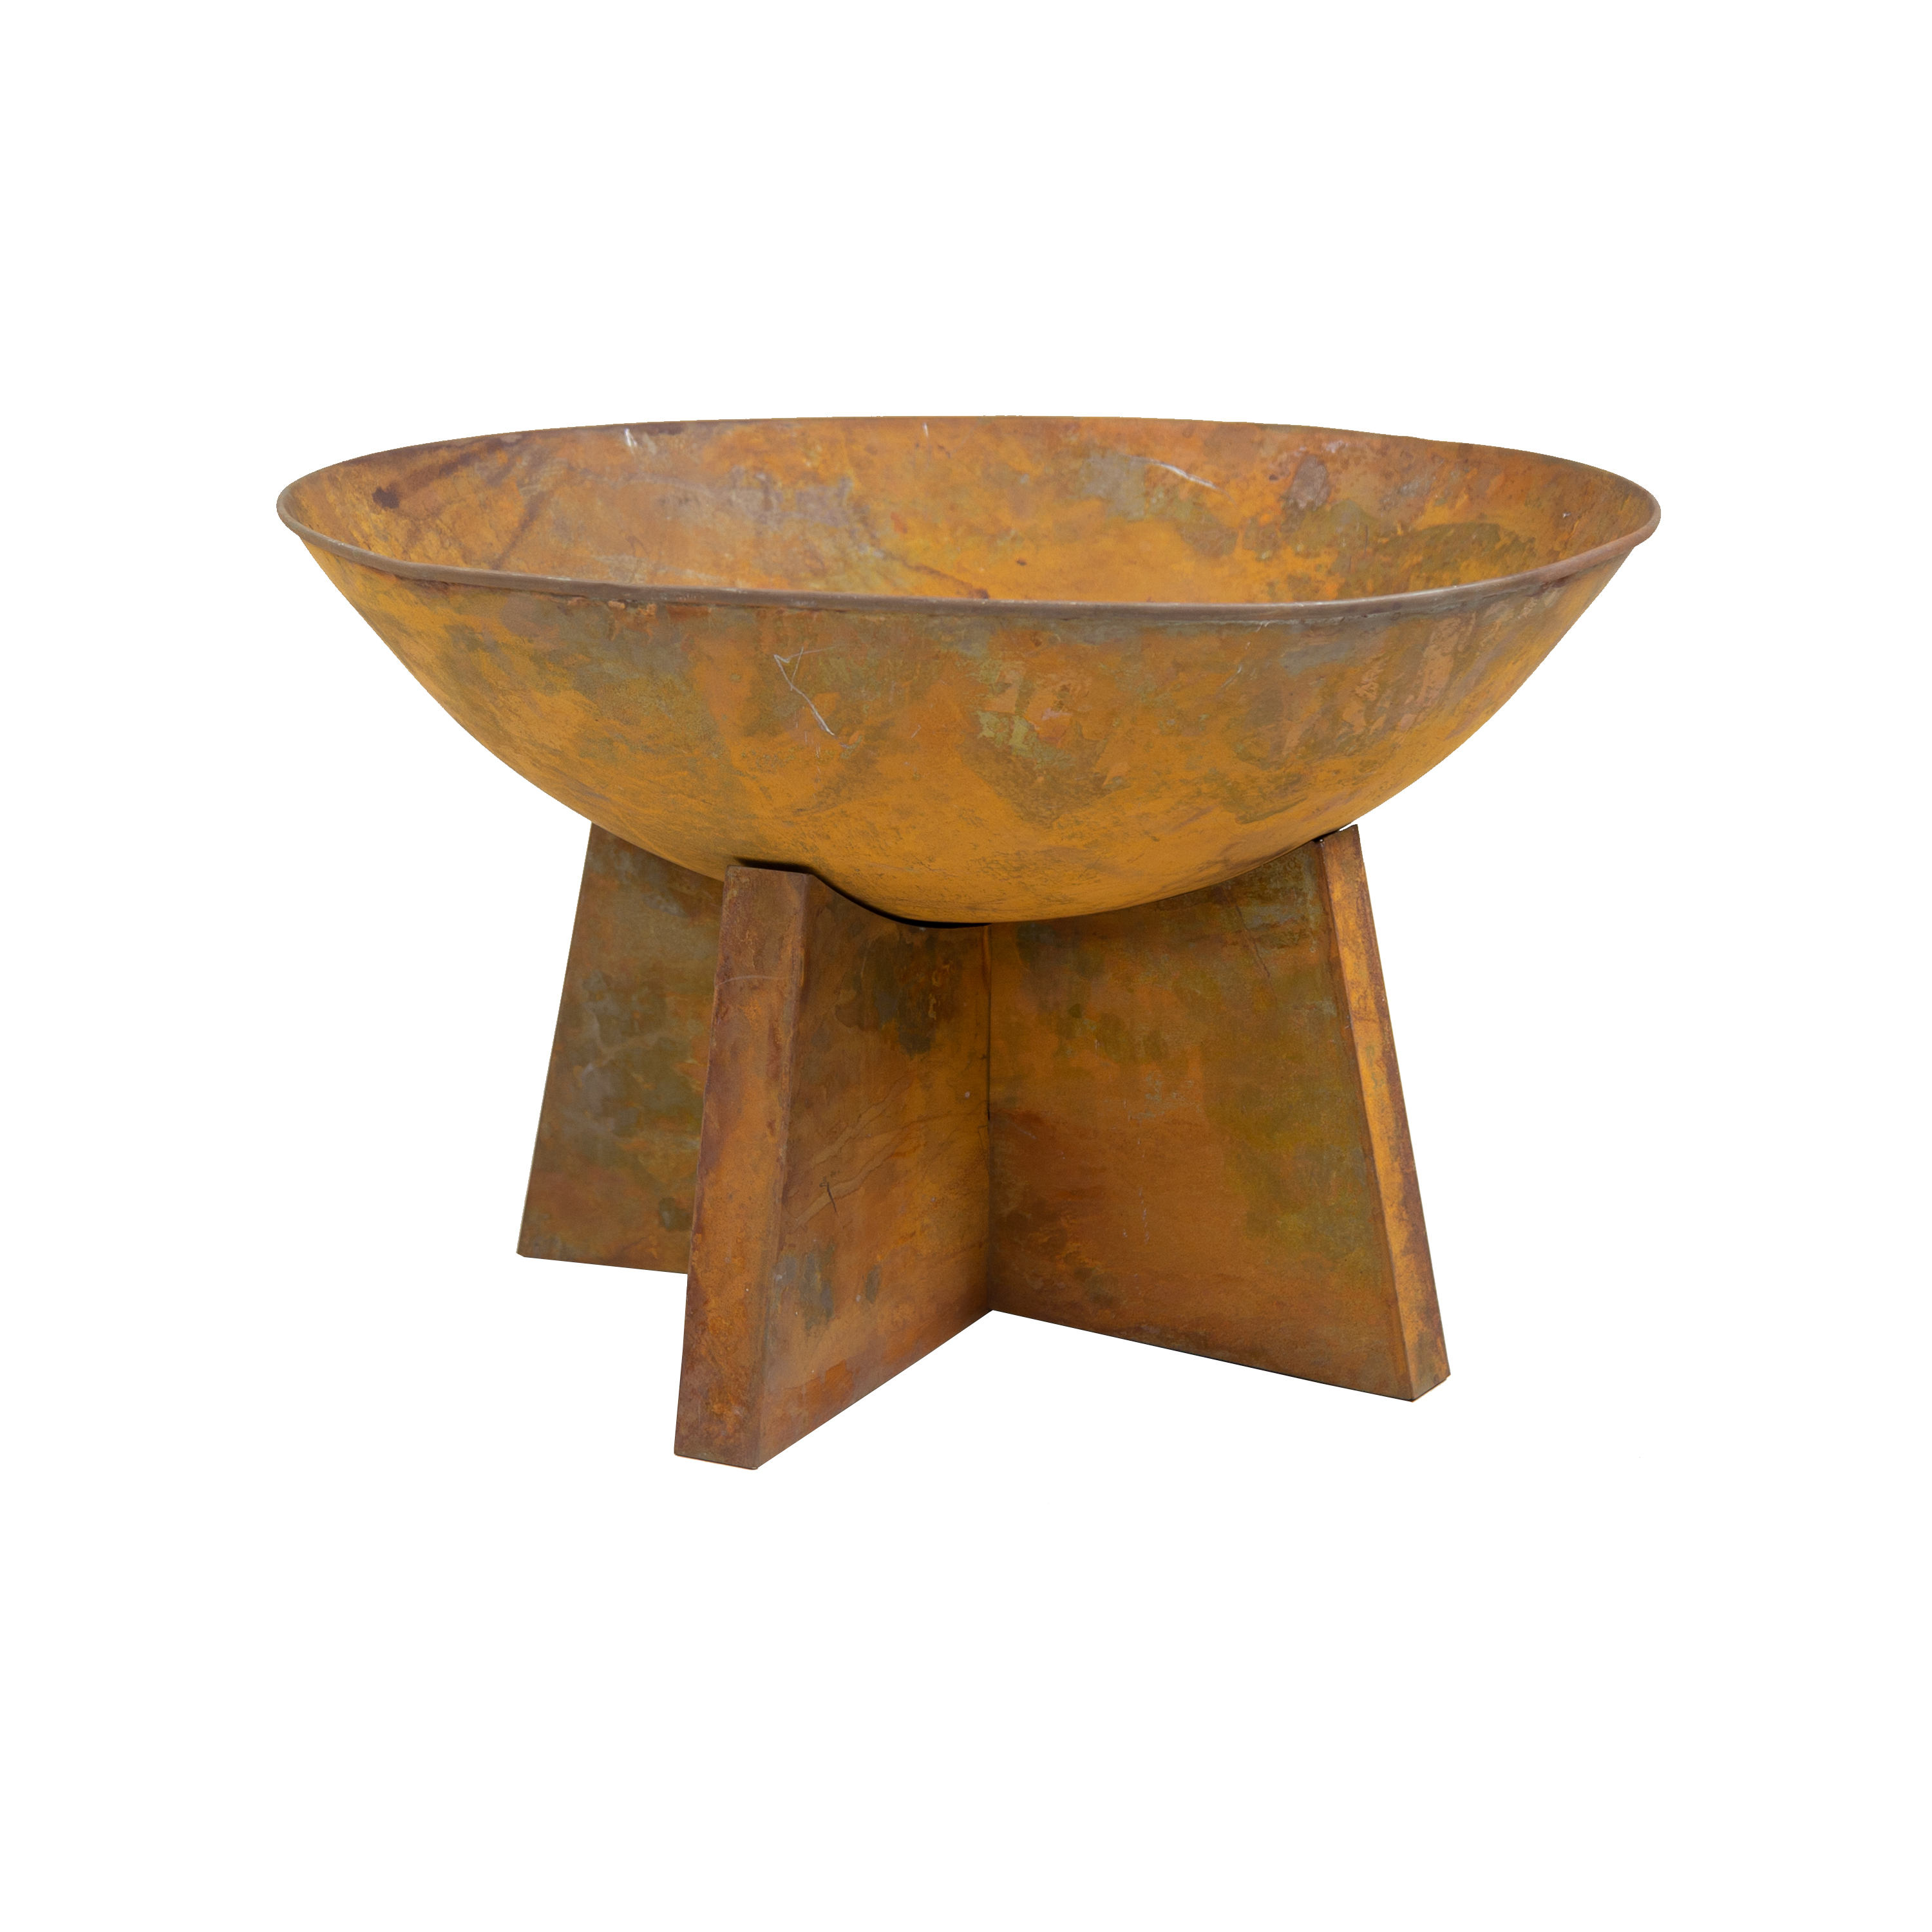 Charles Bentley Rust Fire Pit 60cm Image 2